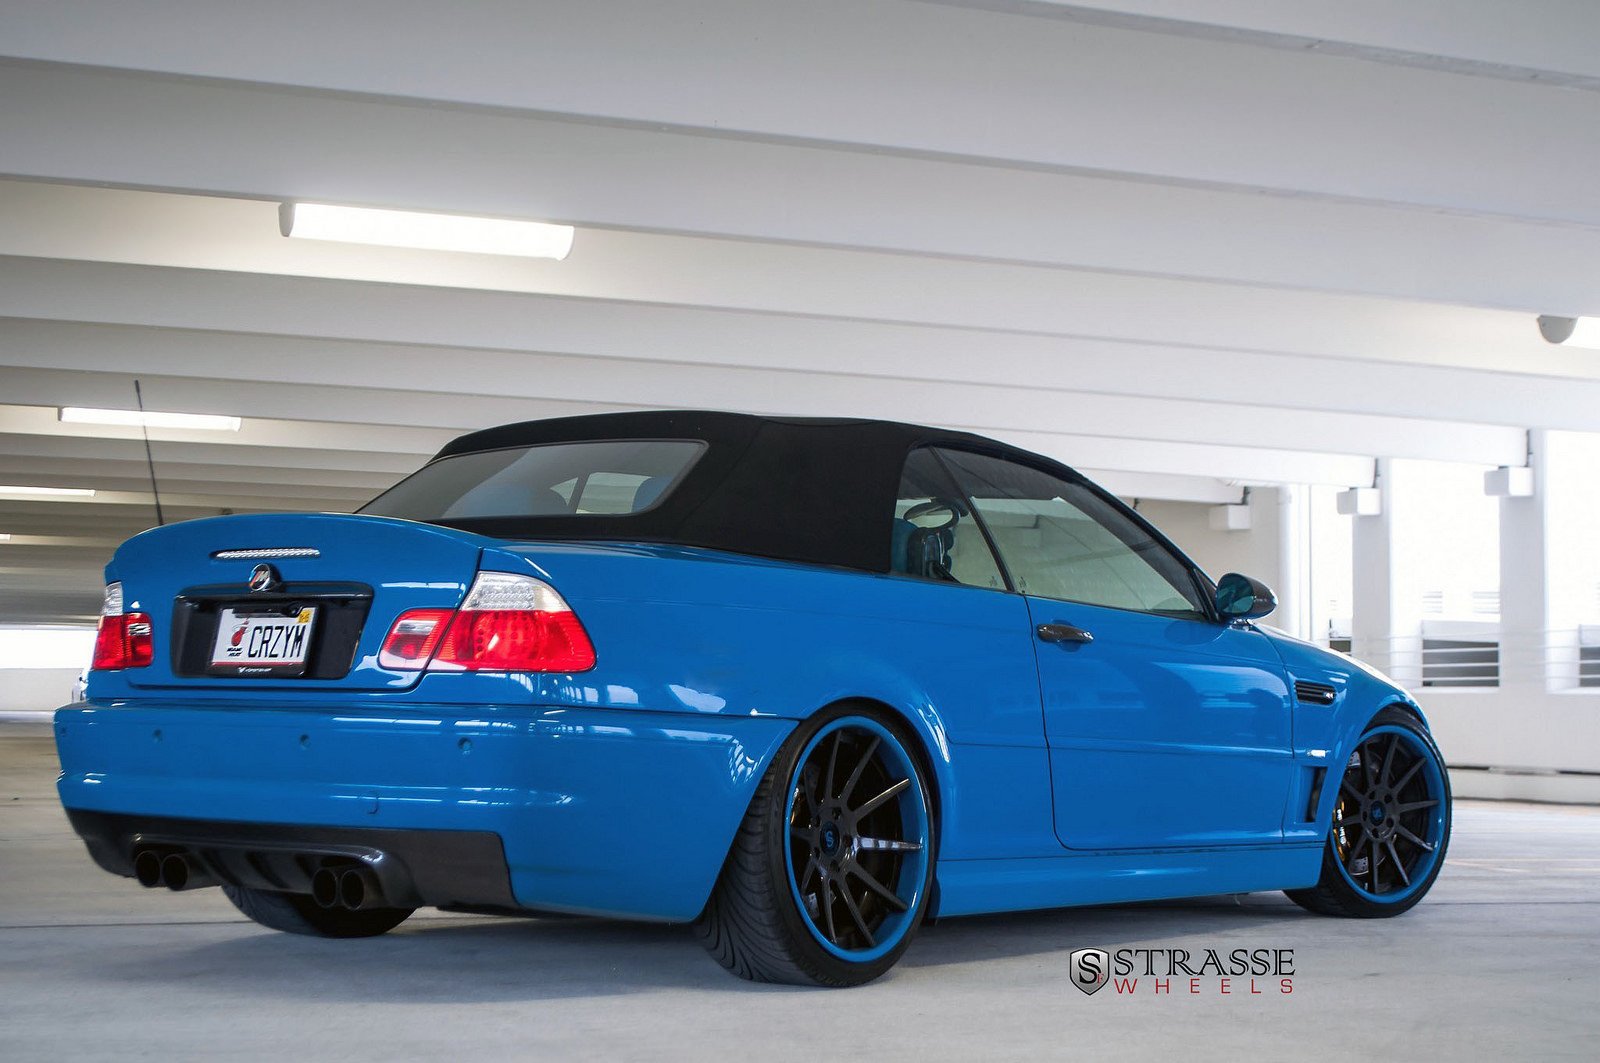 Bmw E46 M3 Convertible Blue Strasse Tuning Wheels Wallpapers Hd Desktop And Mobile Backgrounds